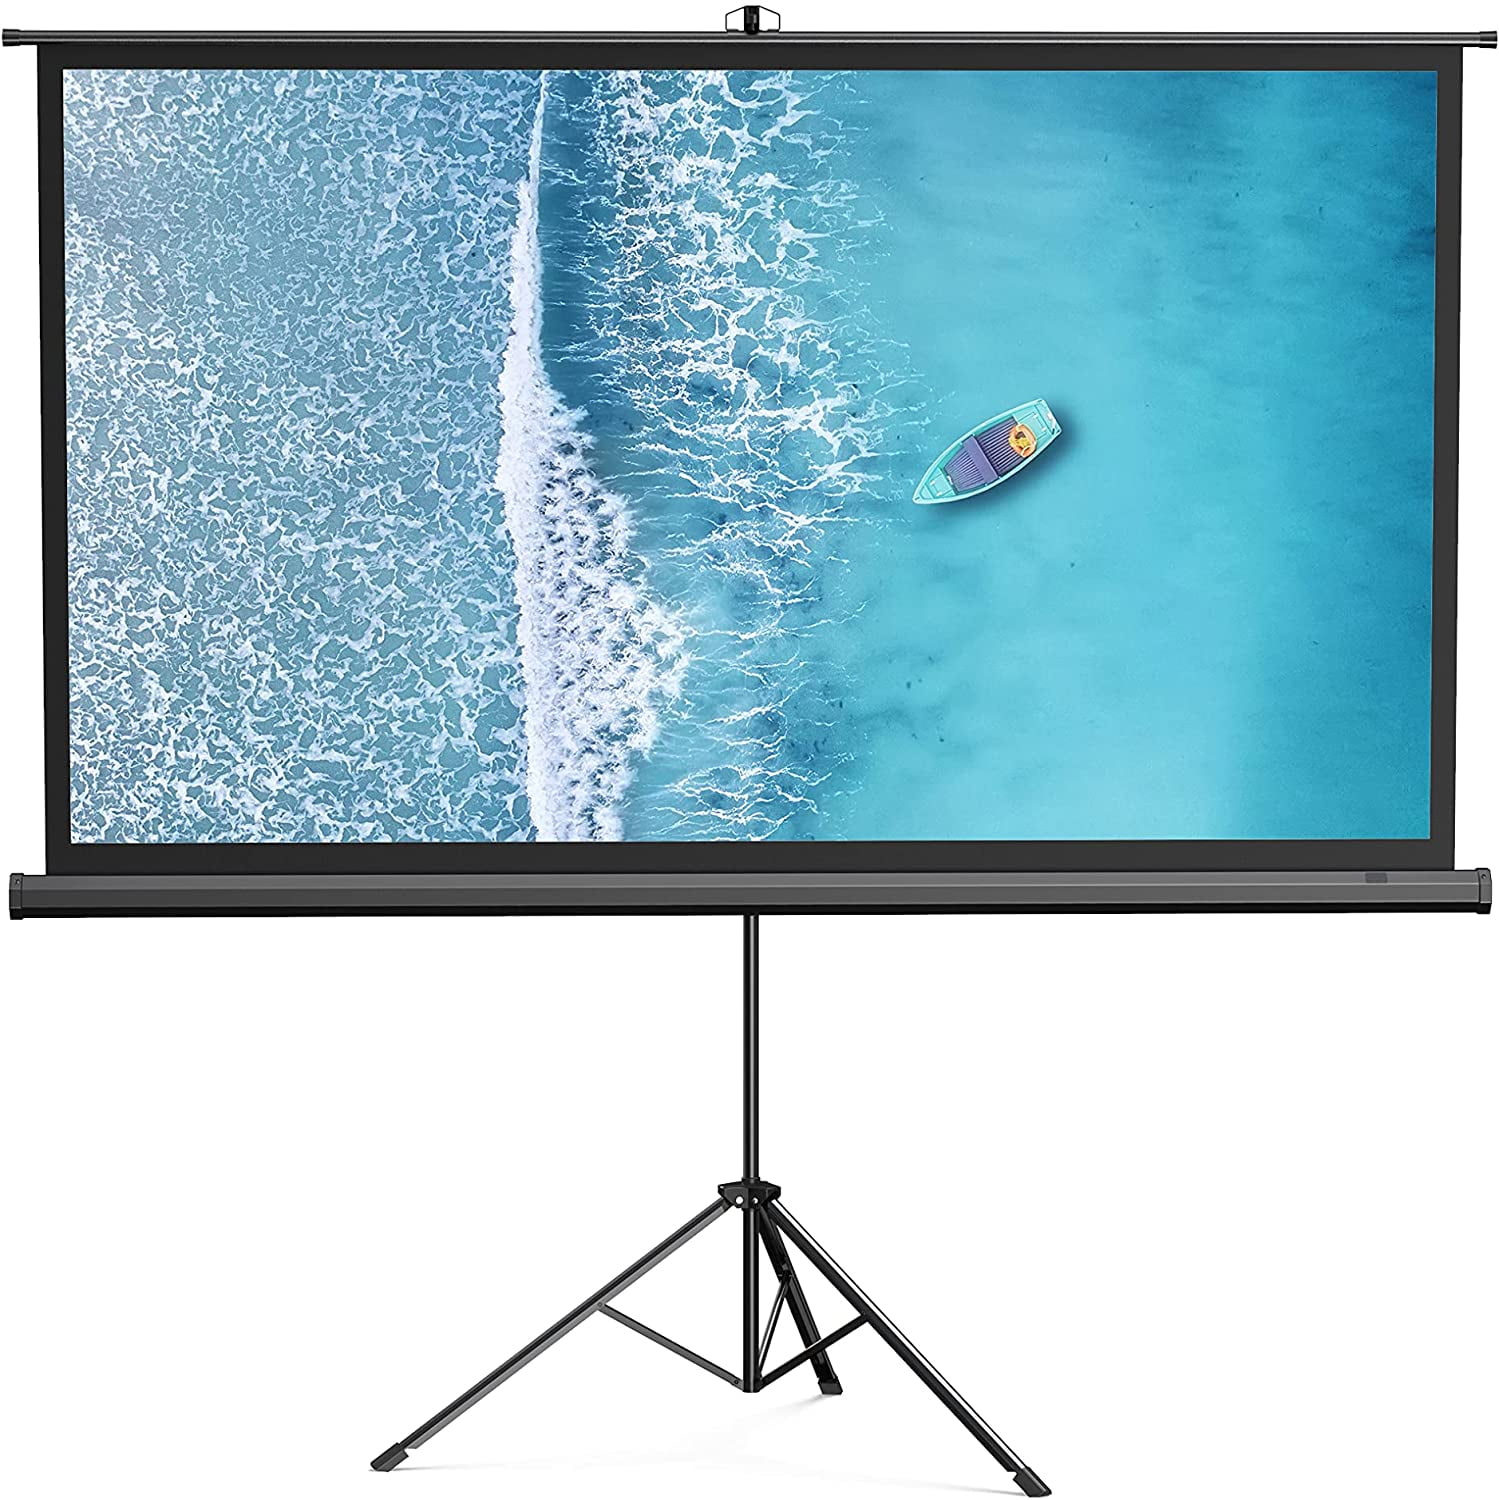 Projector Screen with Stand 4k HD 16:9 Projector Screen Foldable Anti-Crease Portable Projector Movie Screen for Outdoor Indoor Home Theater Backyard Cinema Outdoor Projector Screen 100 Inch 